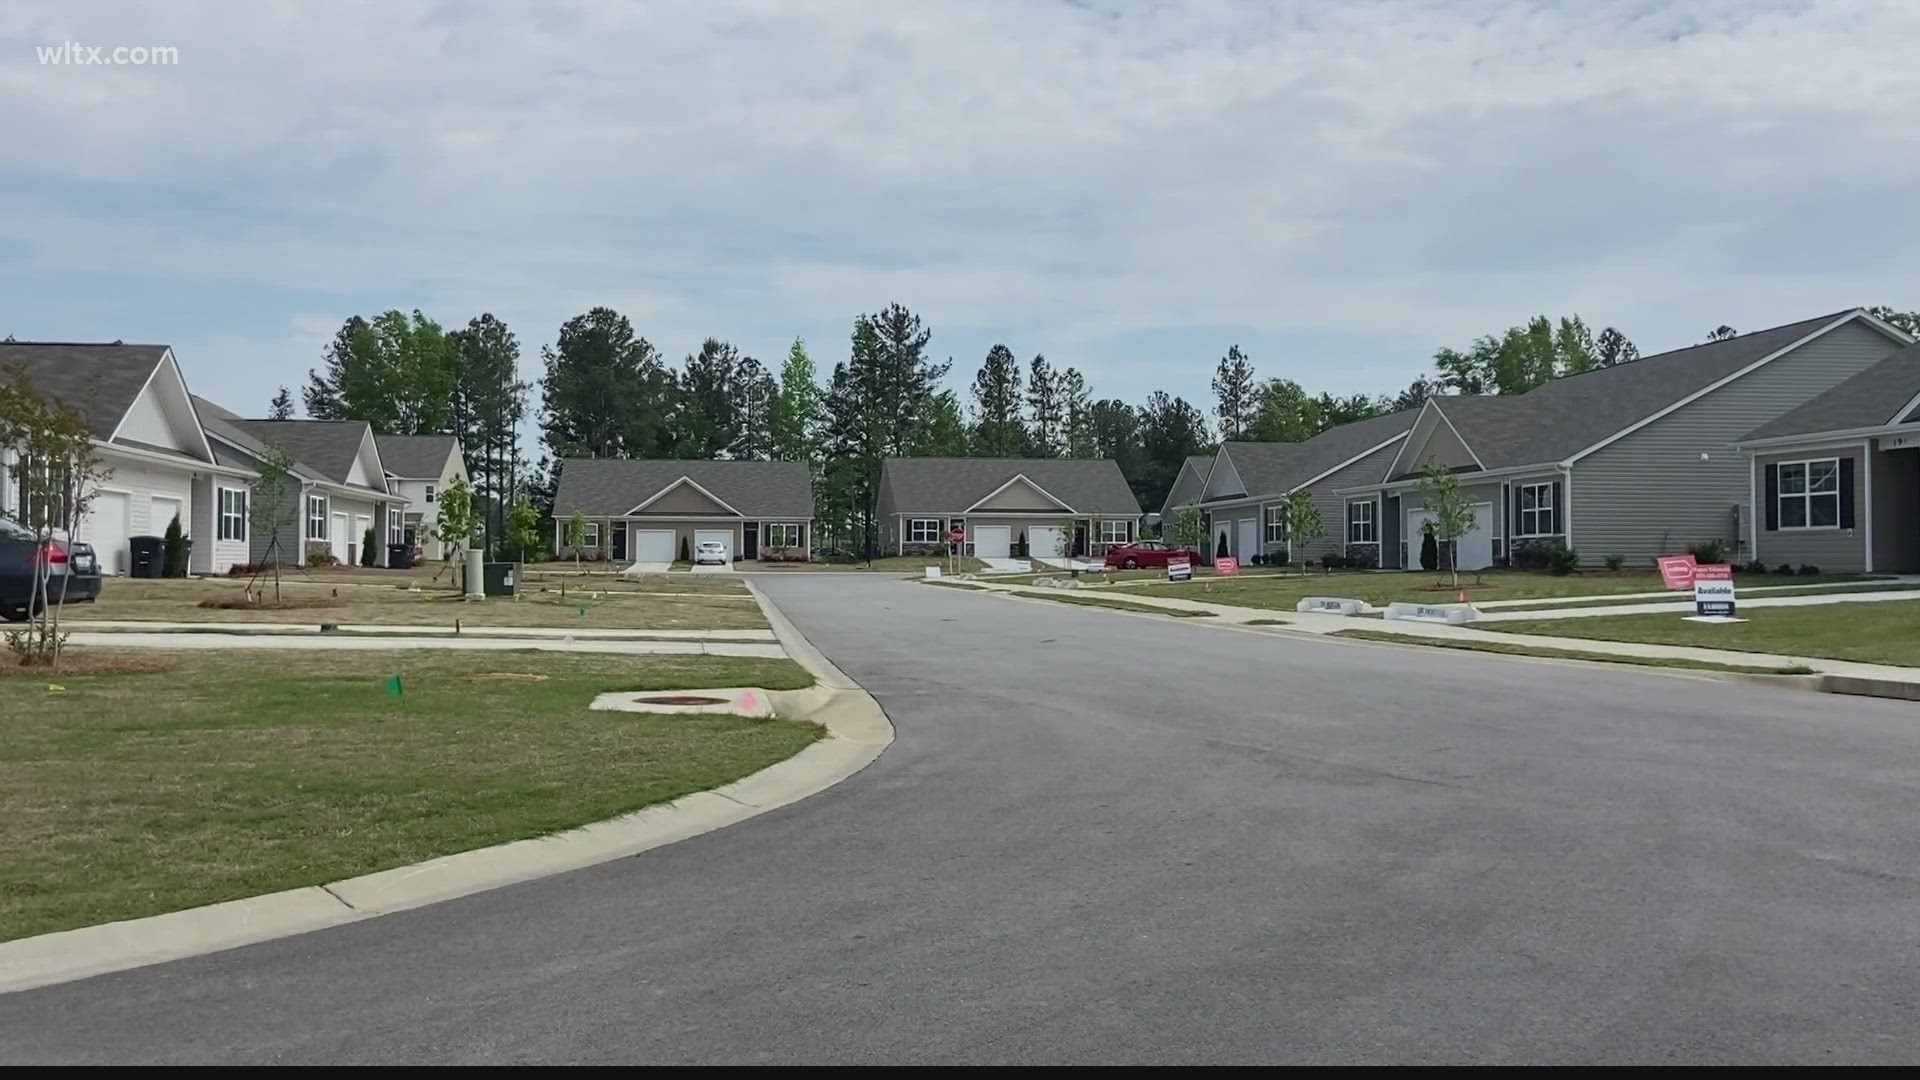 Growth has become top of mind as two large housing developments in Kershaw county have been proposed.